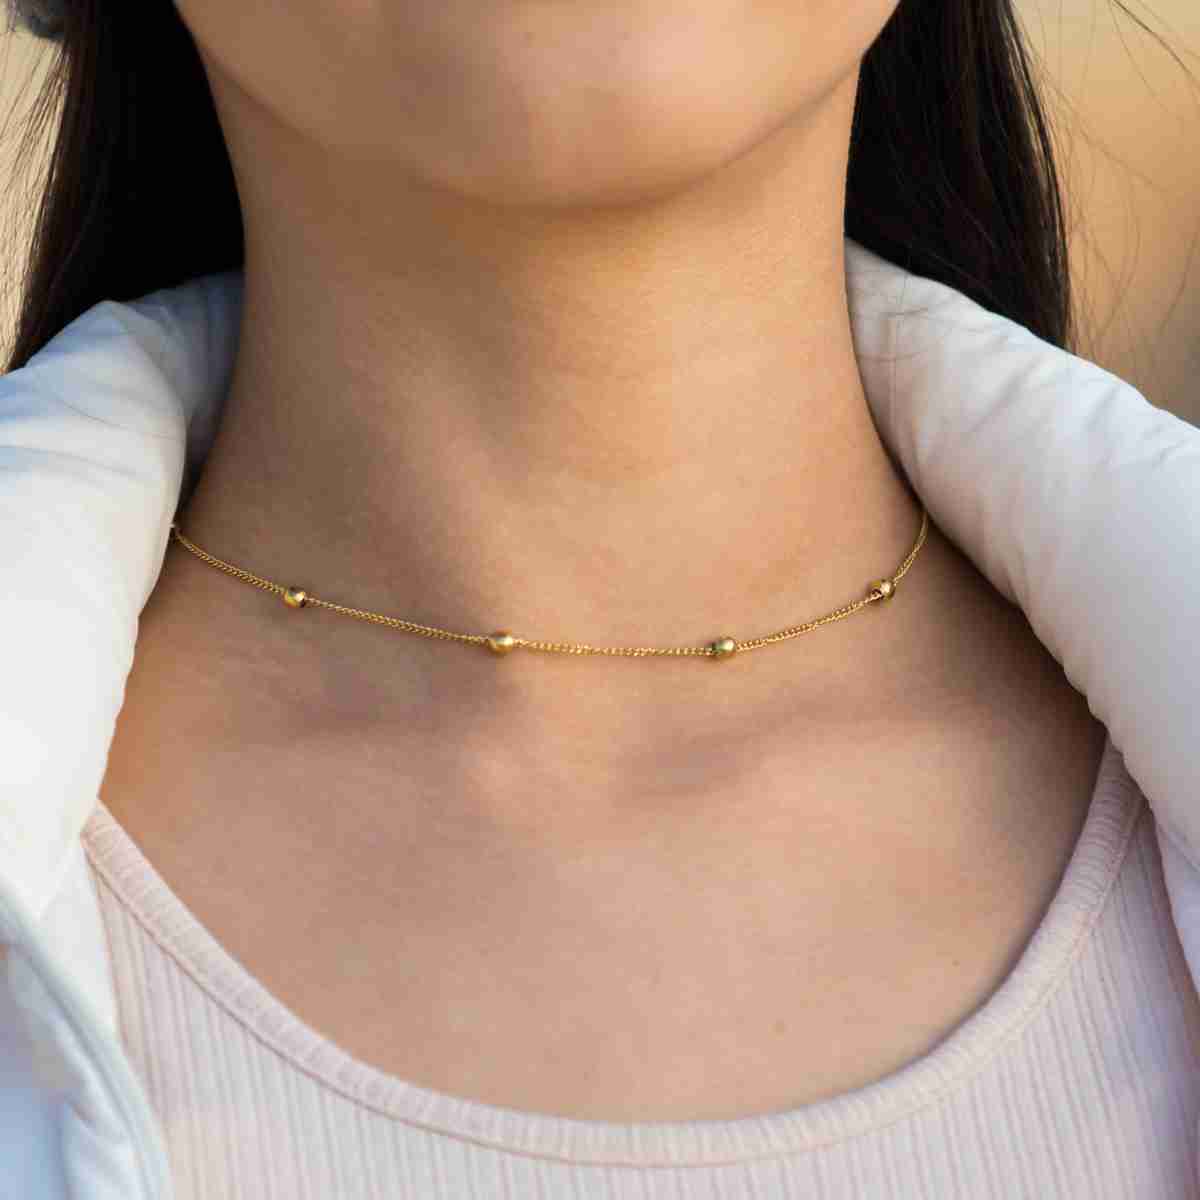 necklace with discount code